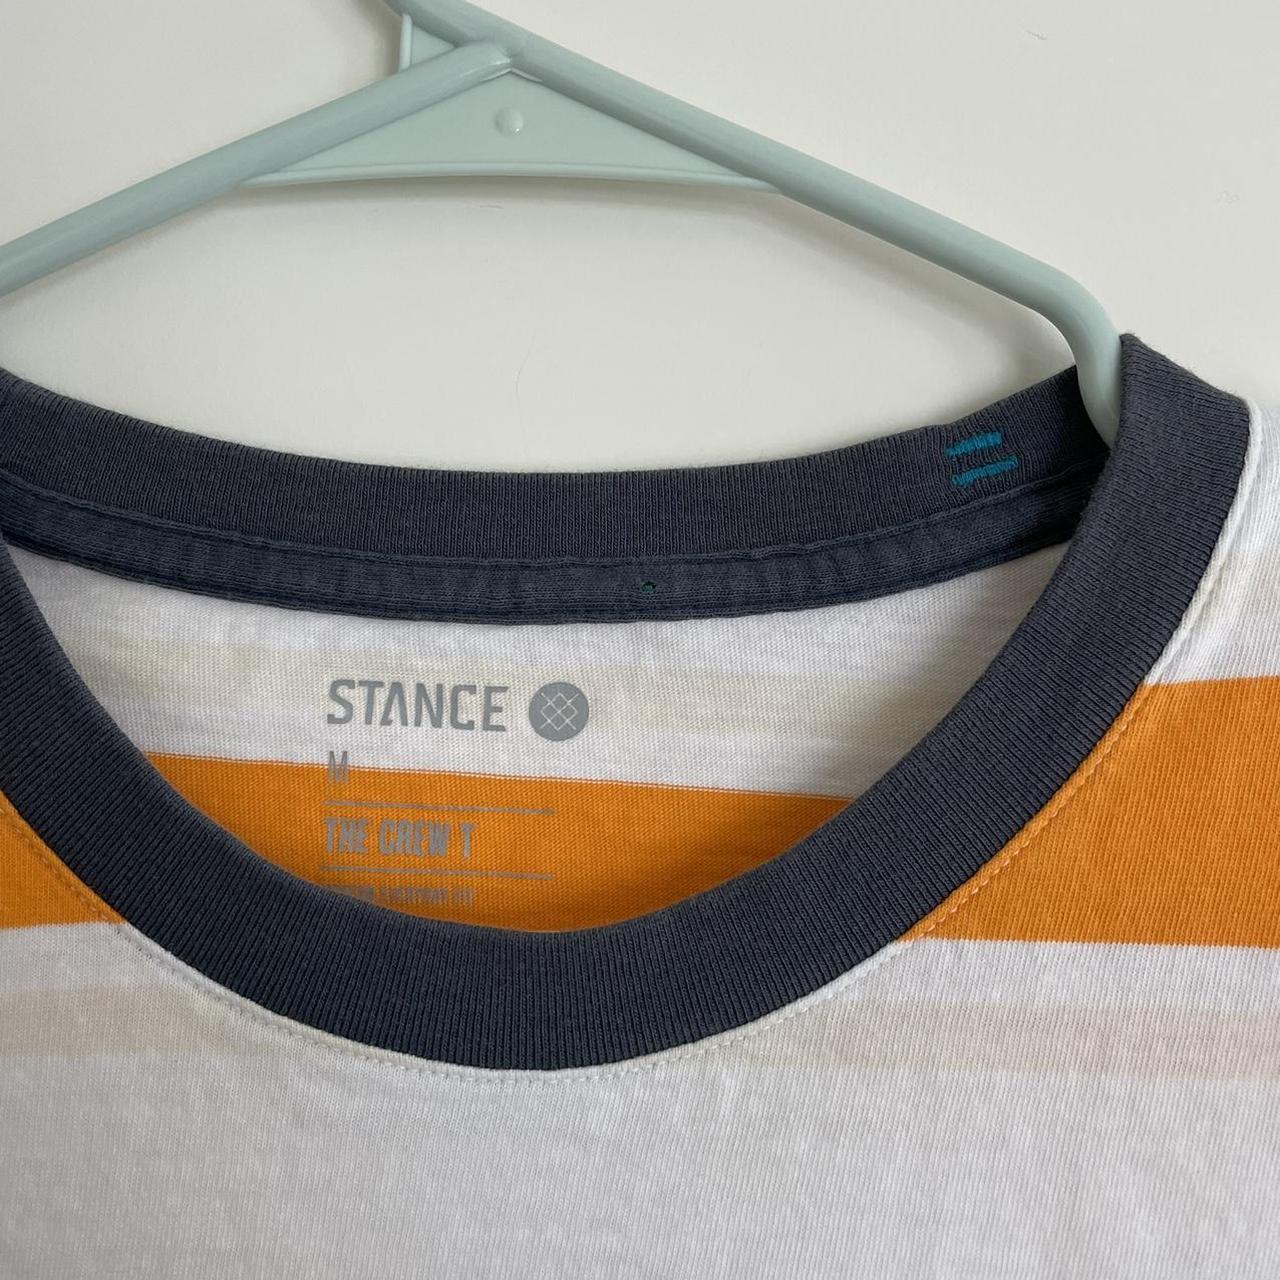 Product Image 3 - Orange and white striped Stance